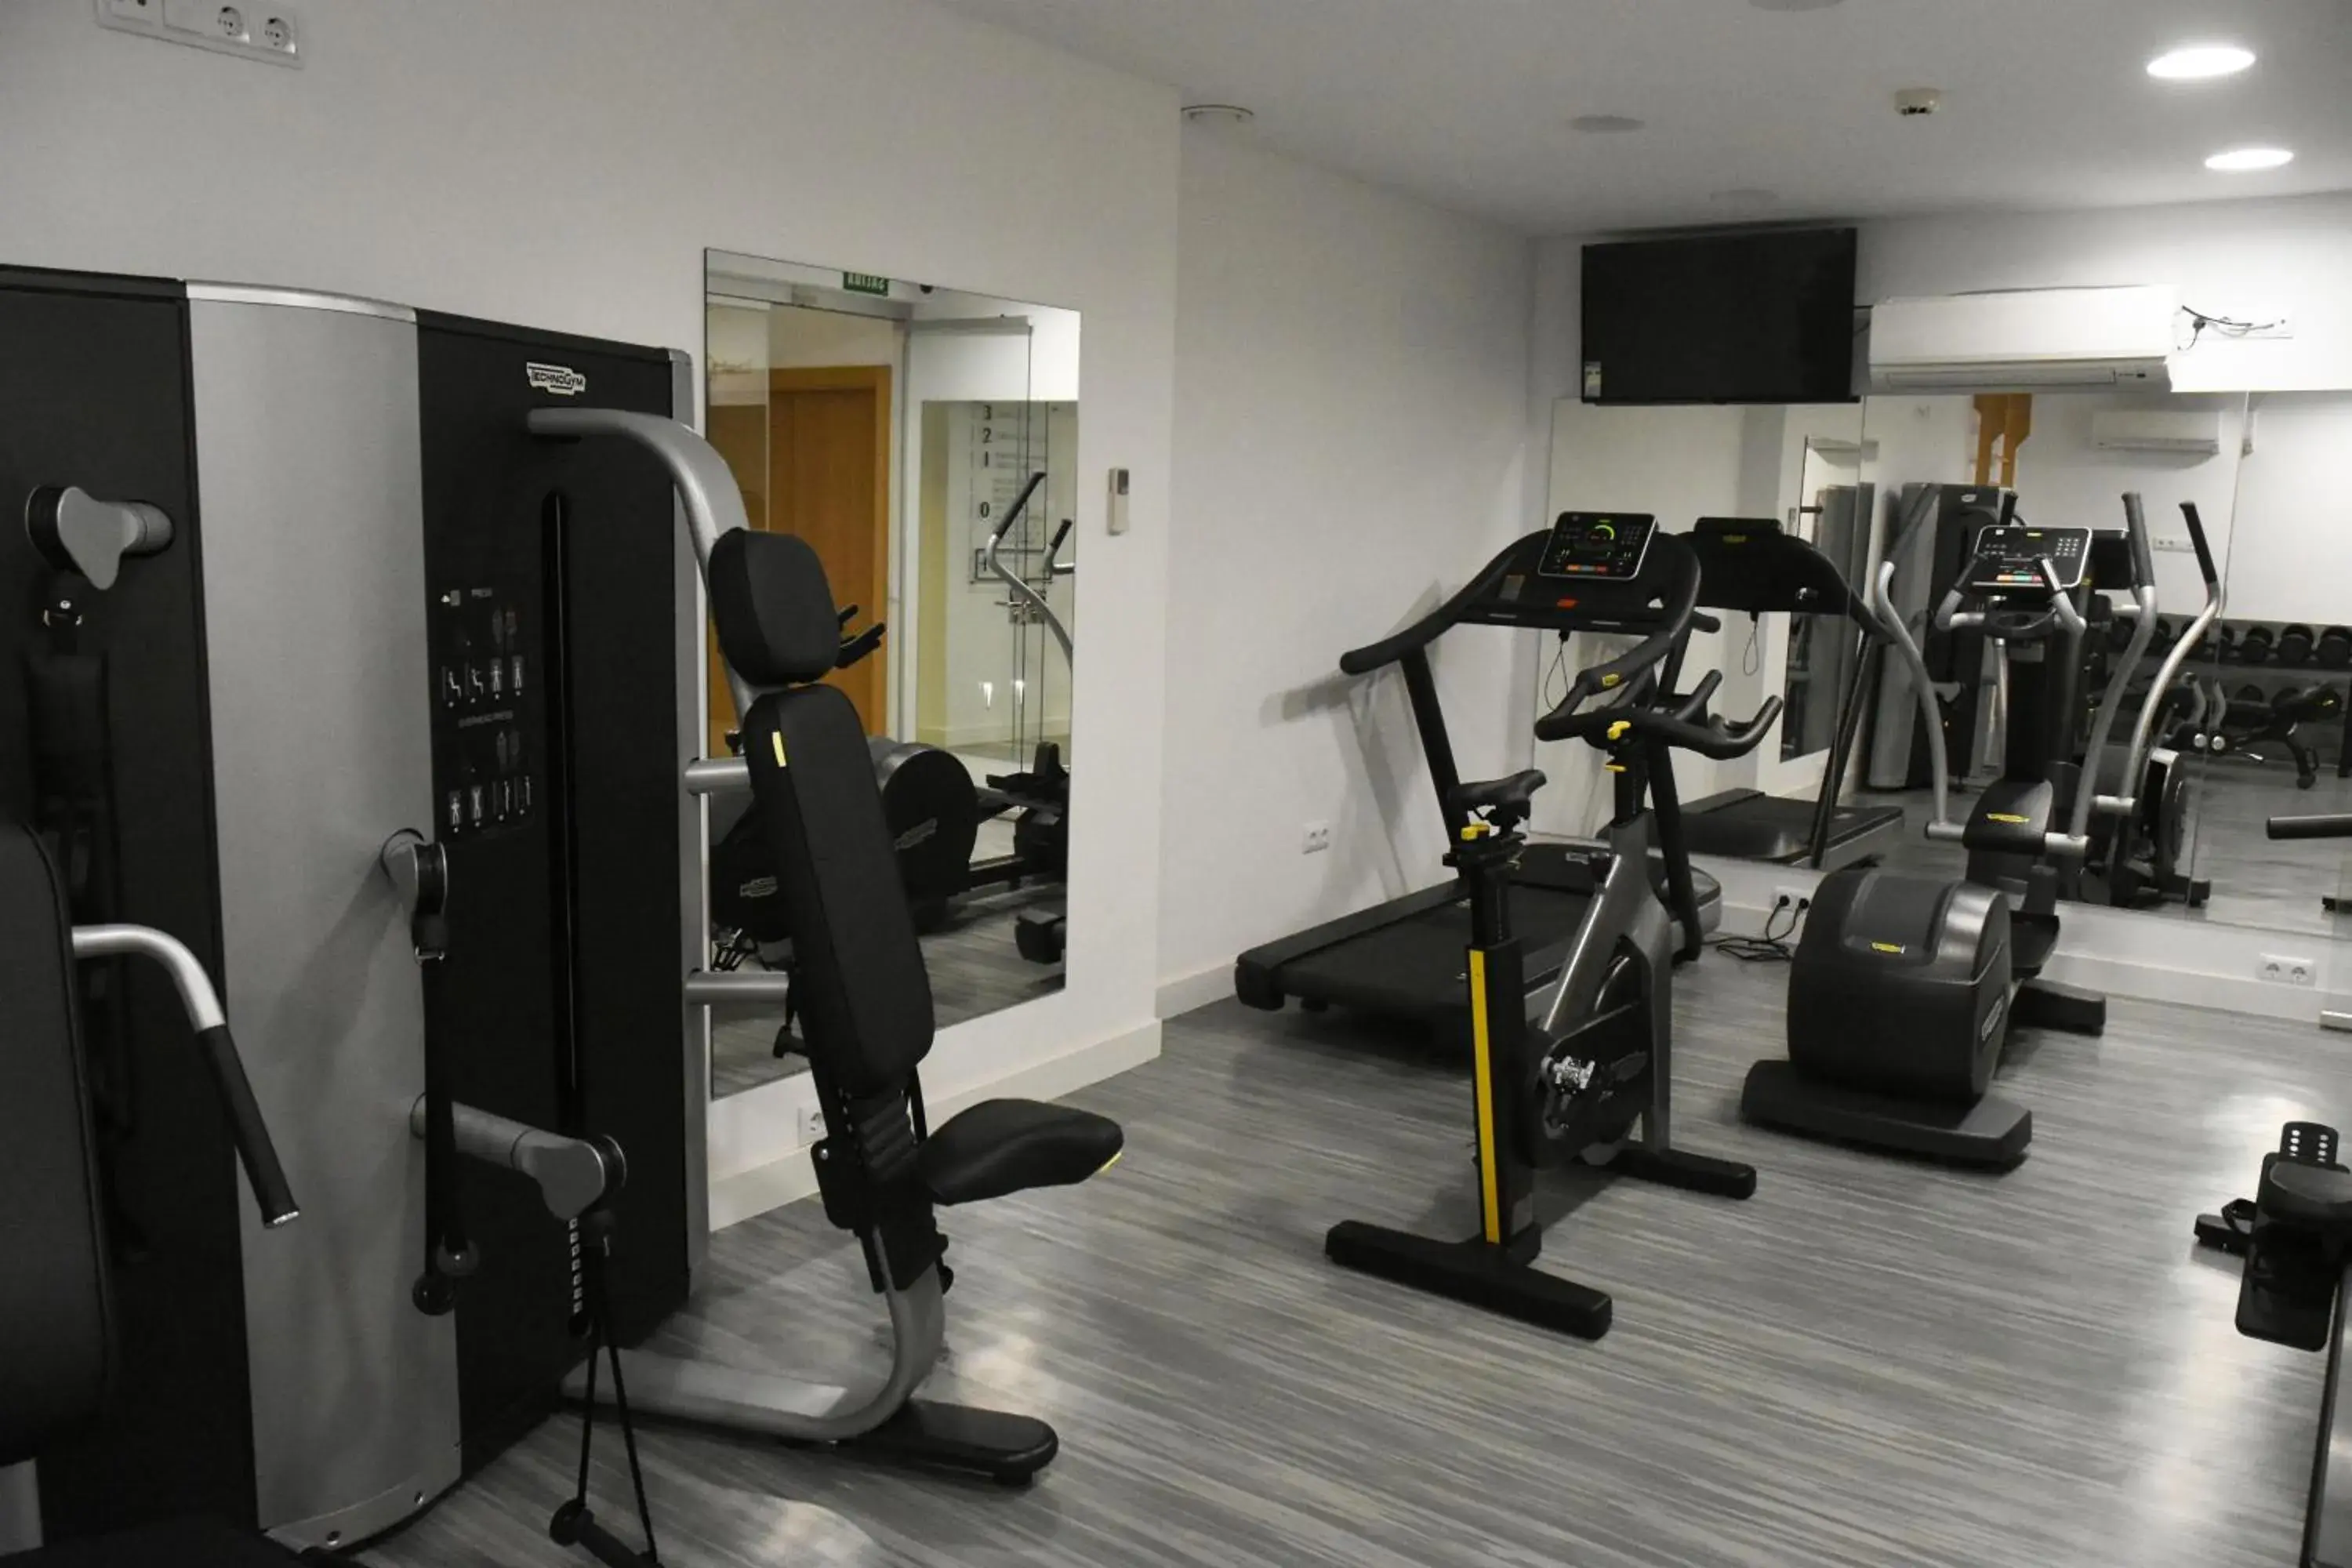 Fitness centre/facilities, Fitness Center/Facilities in Ardales